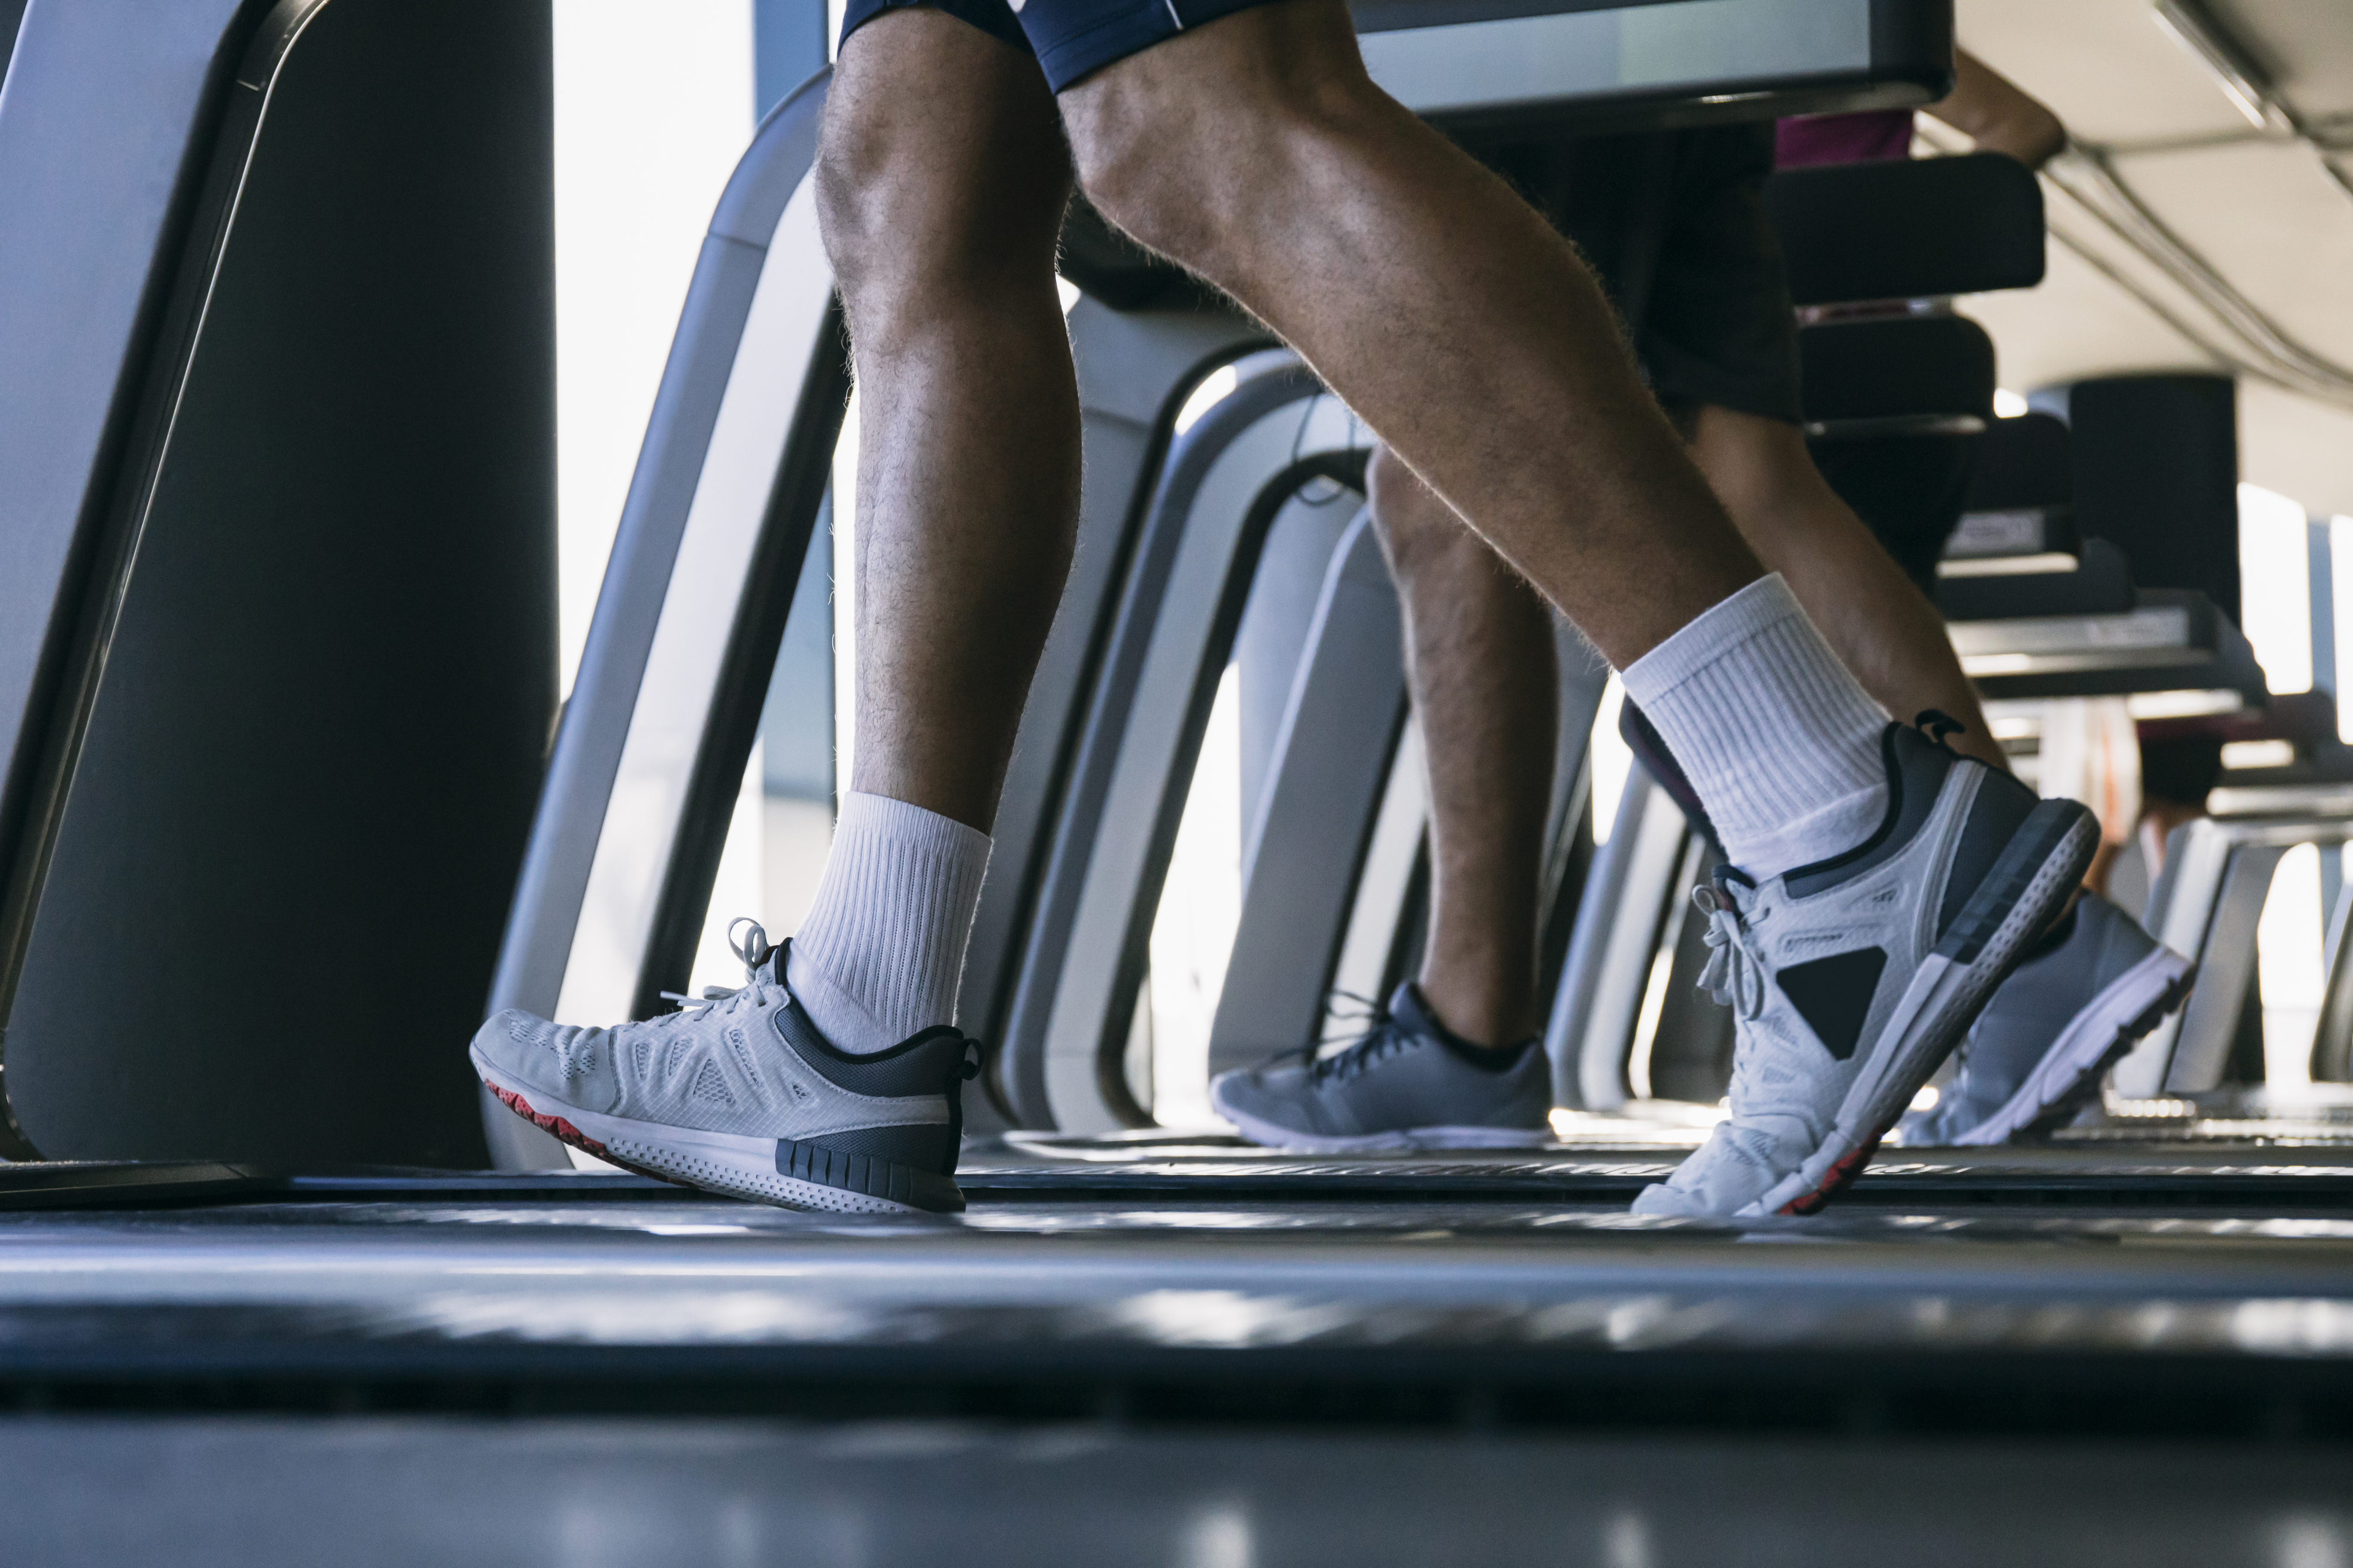 Person exercising on a treadmill, focusing on their legs and sneakers